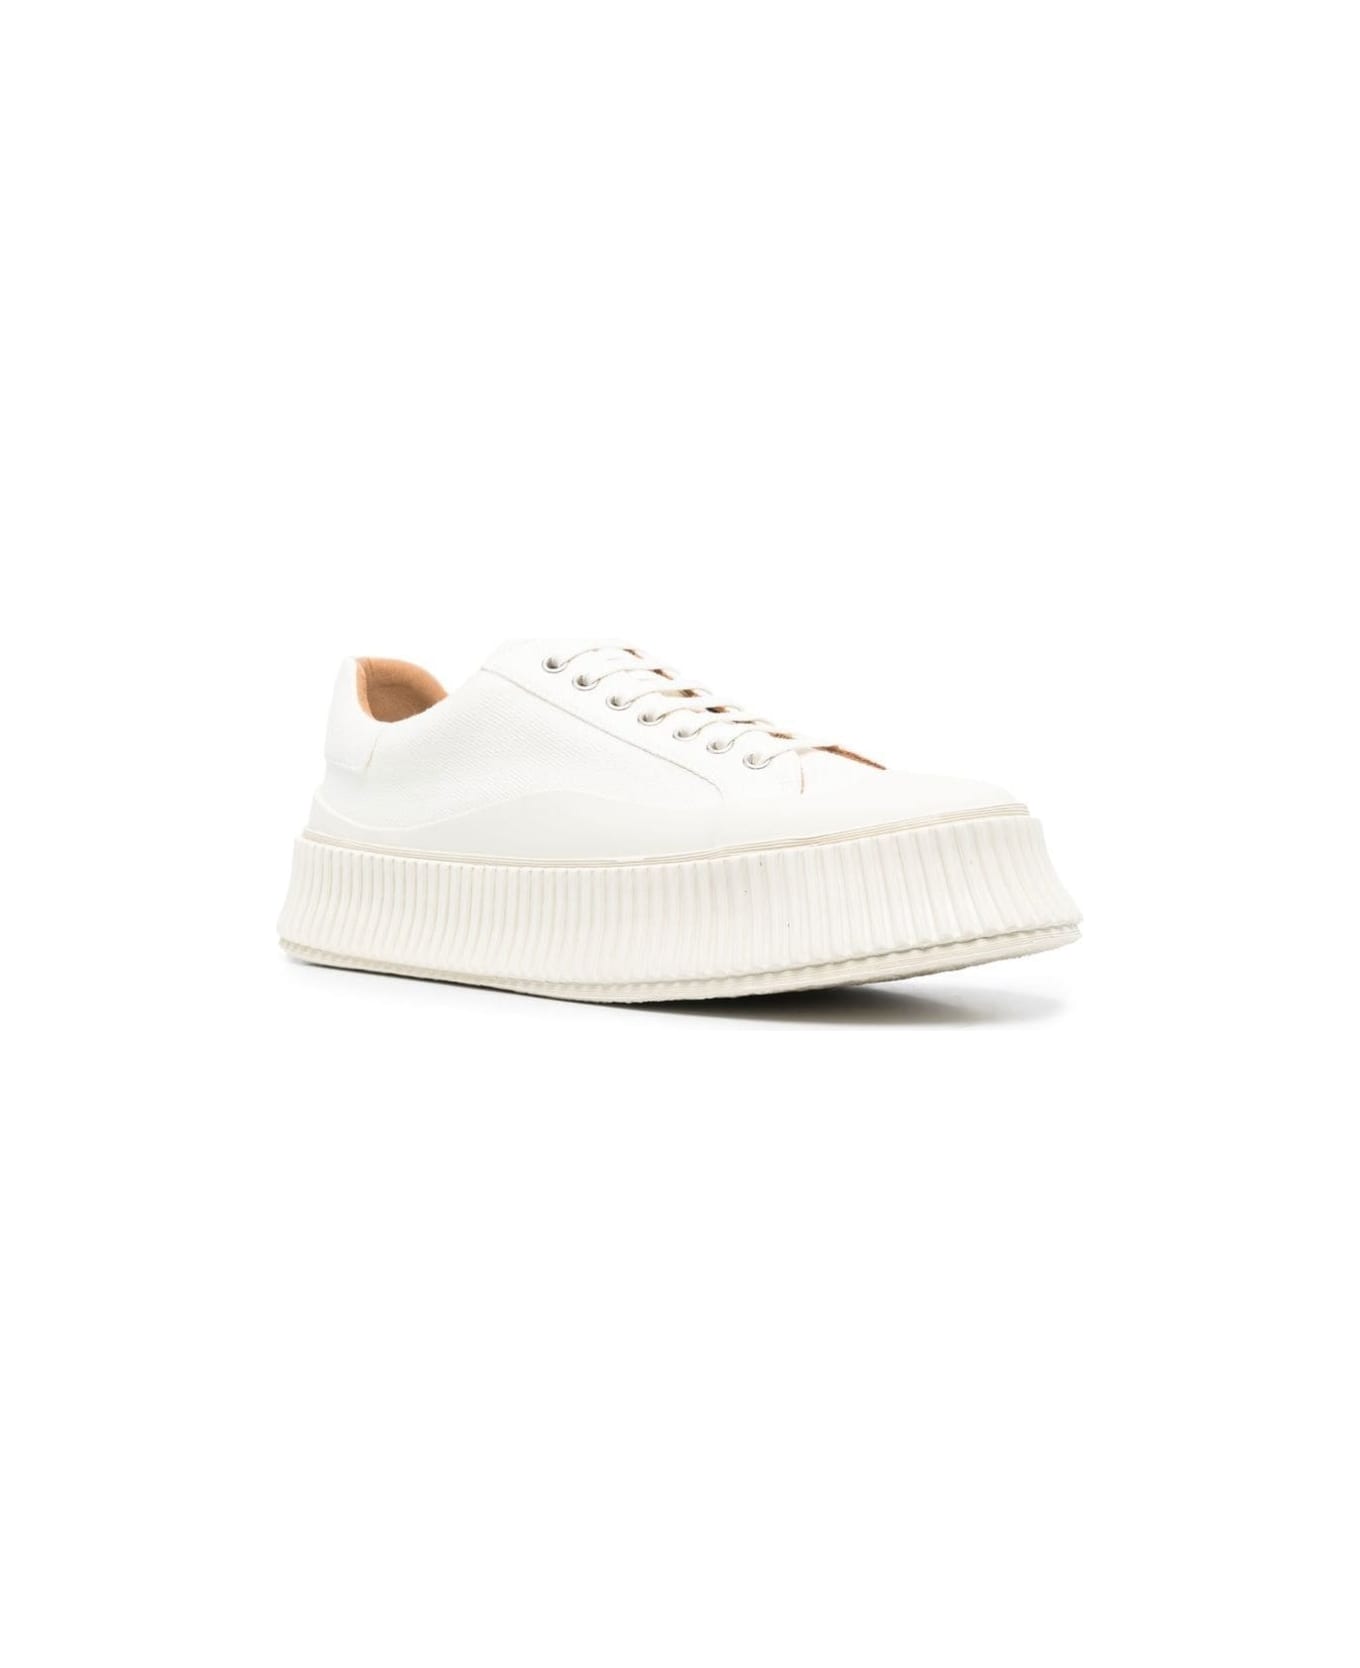 Jil Sander White Ridged Low Top Sneakers In Canvas And Leather Man - White スニーカー